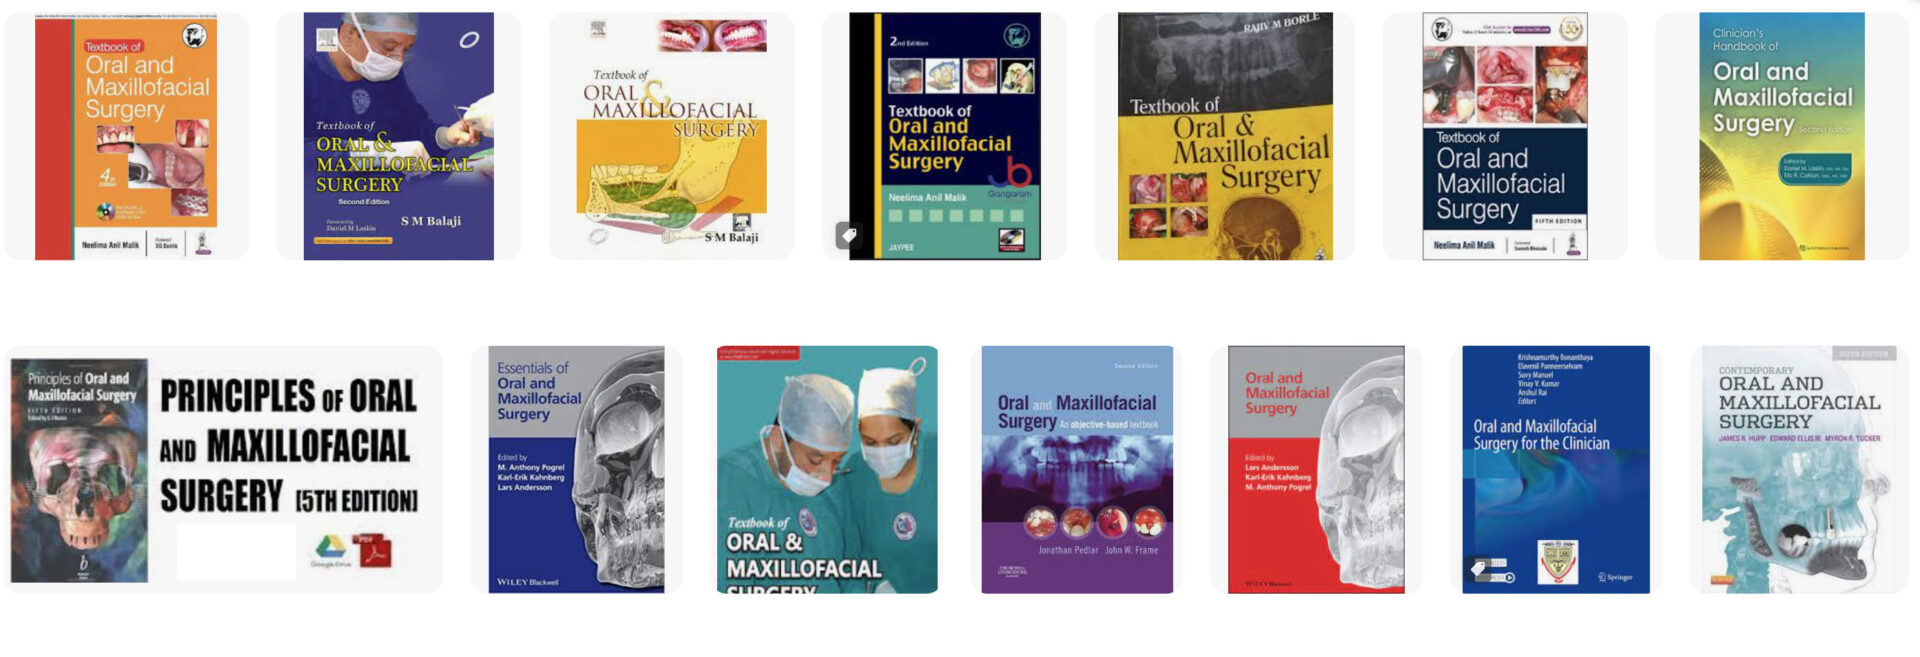 Oral and Maxillofacial Surgery Books Latest Editions